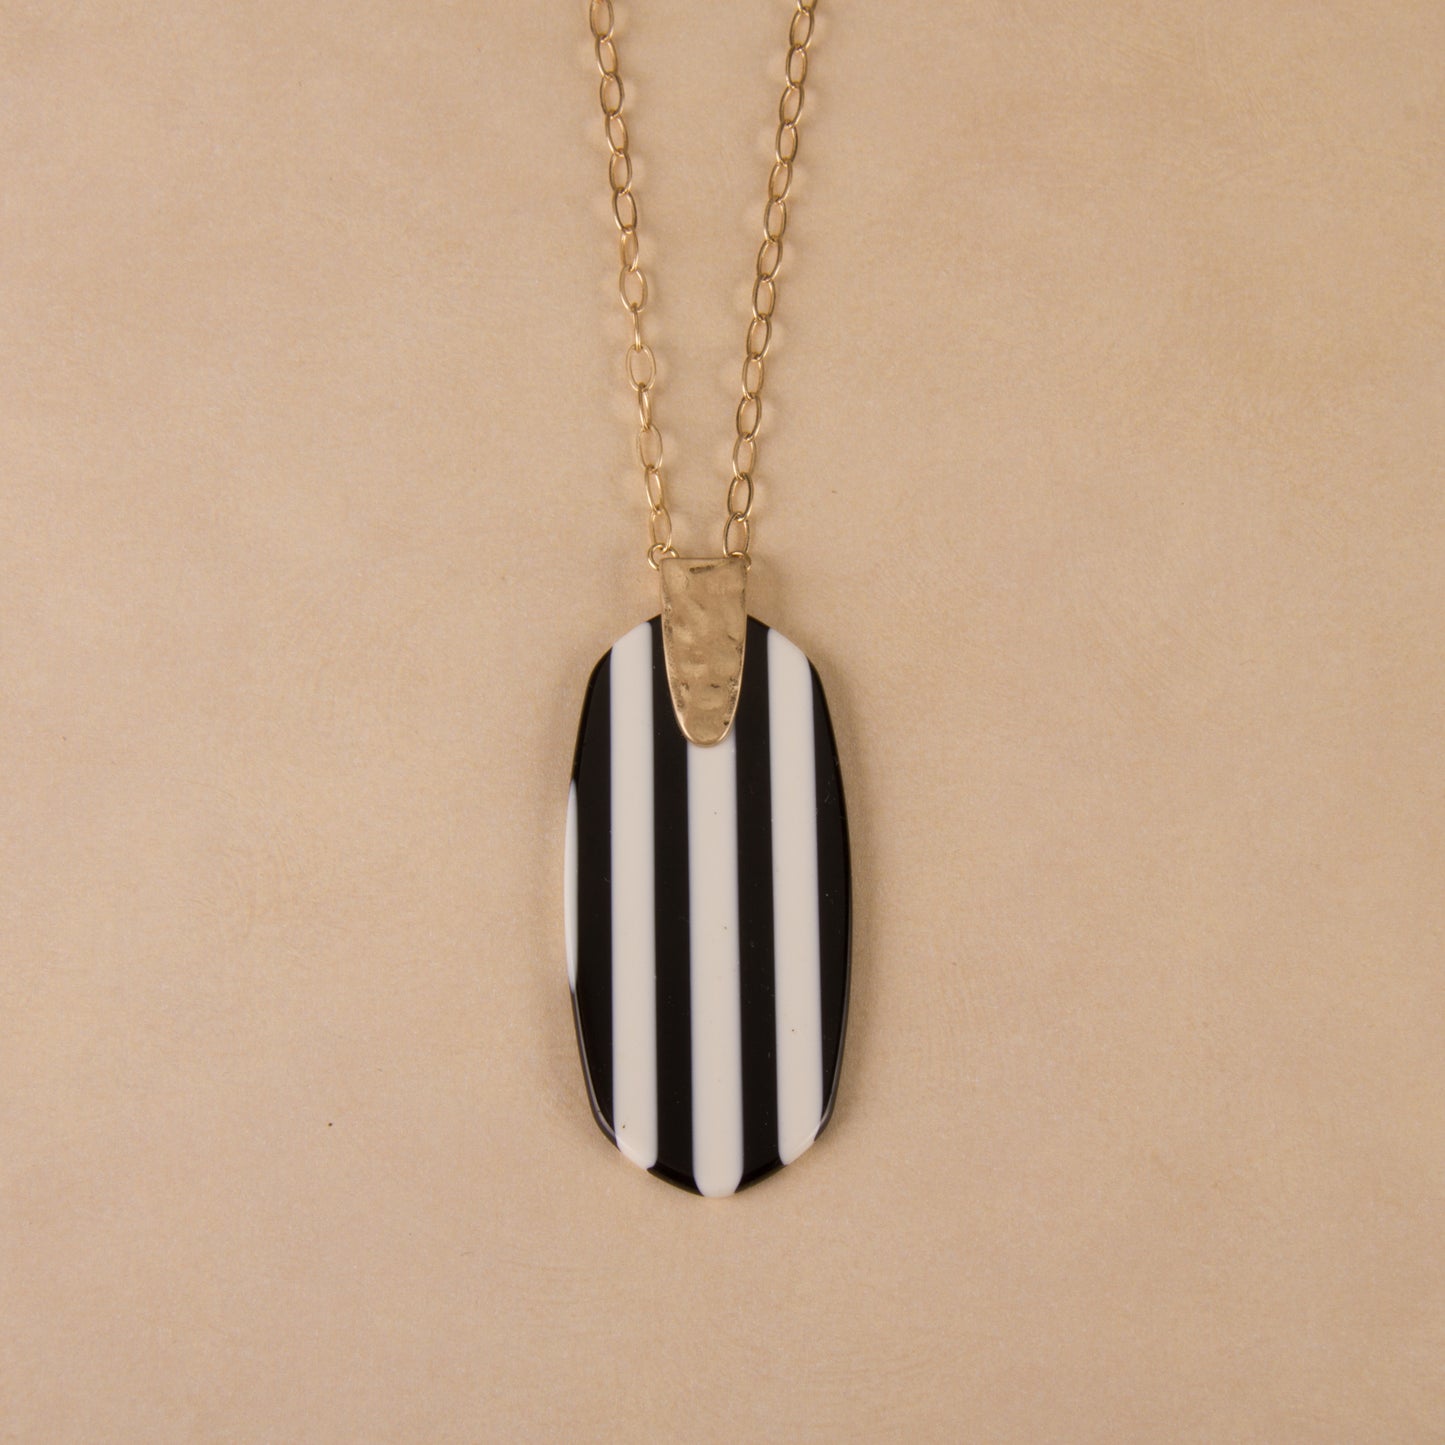 N3262 30" Striped Resin Pendant Necklace